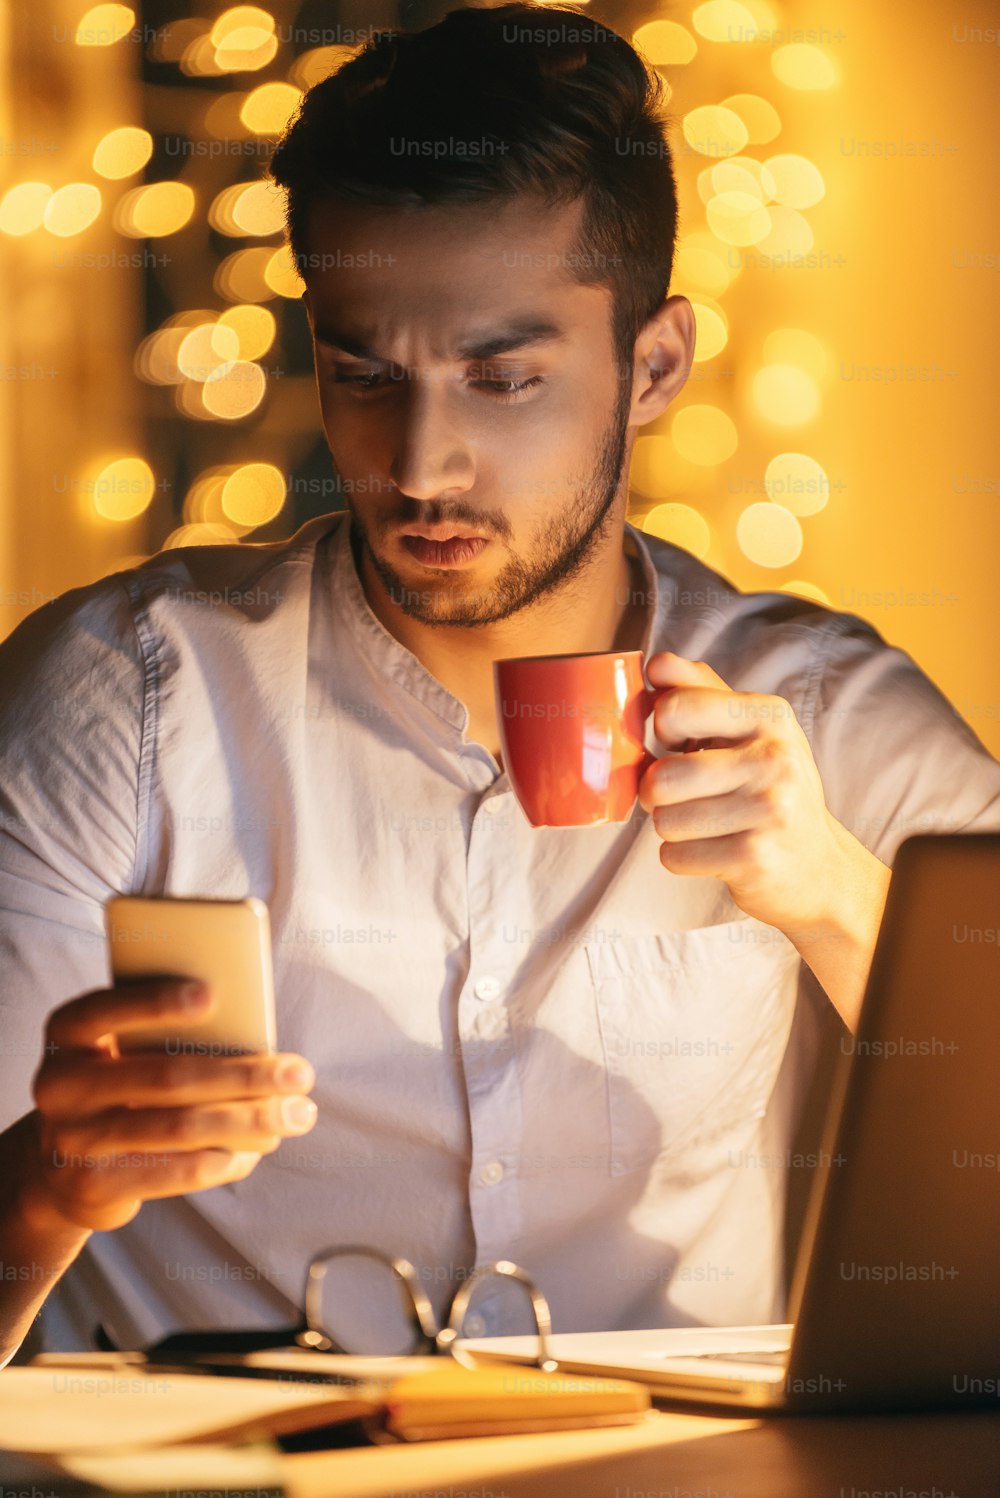 Confident young man looking at his smart phone and holding coffee cup while sitting at his working place at night time with Christmas lights in the background